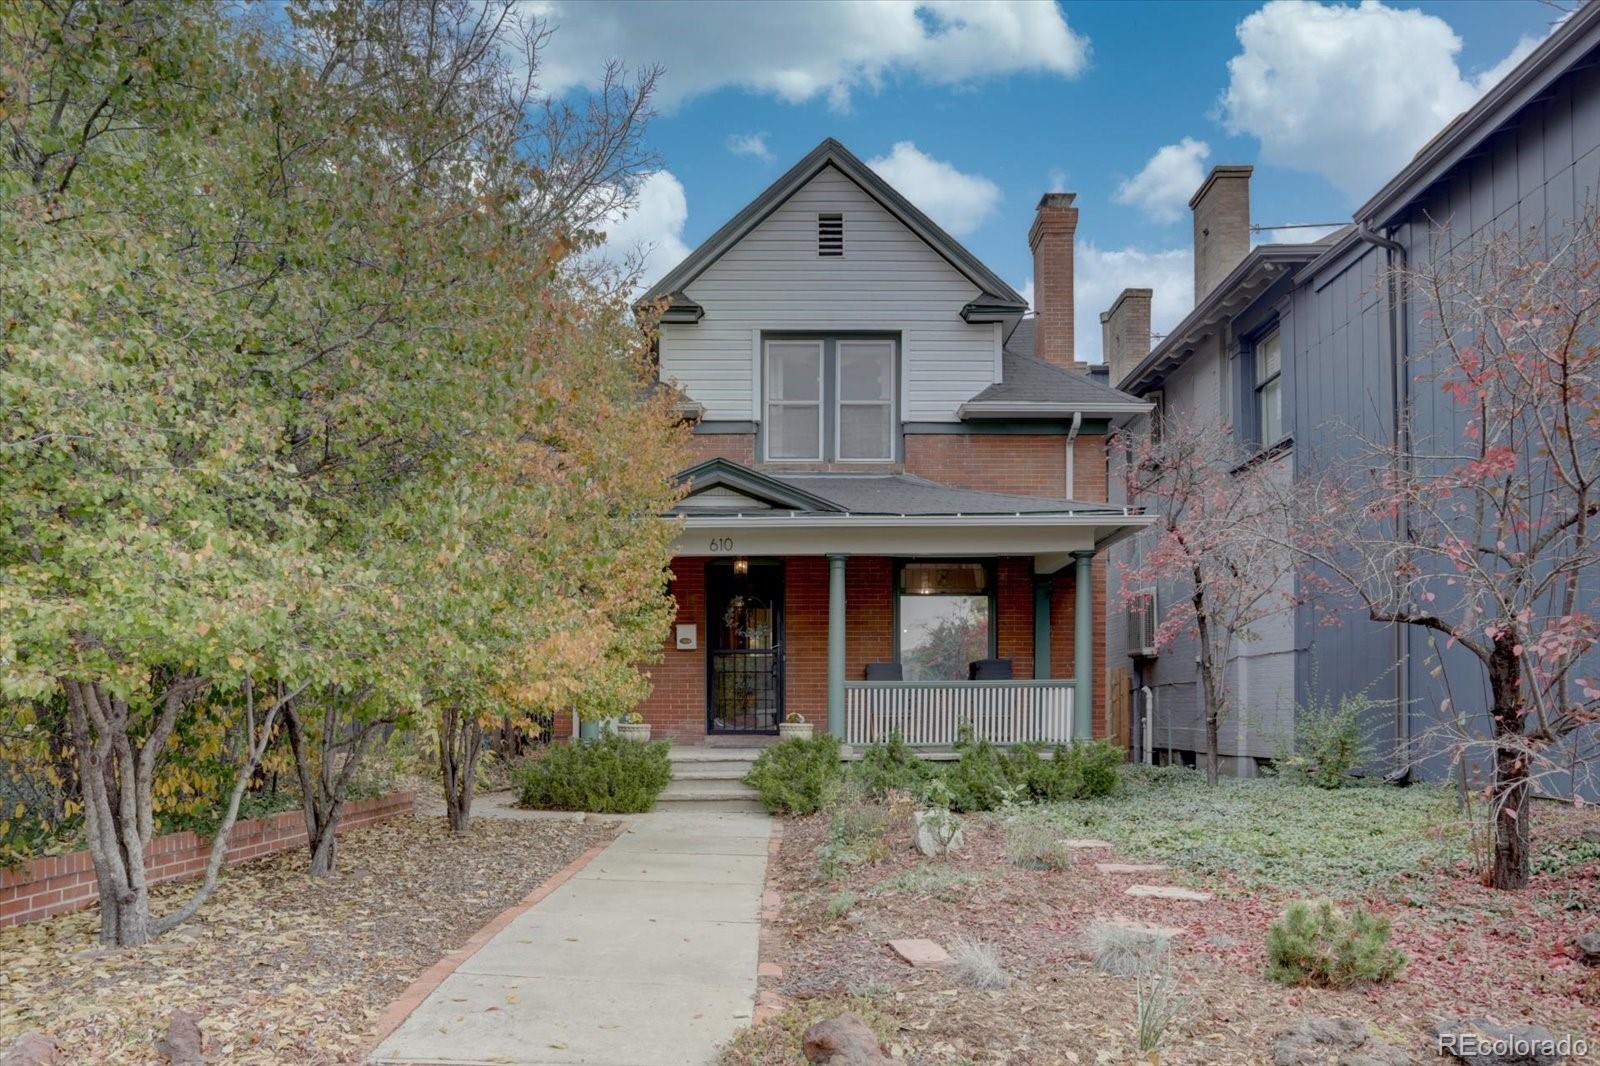 610 n downing street, denver sold home. Closed on 2024-02-26 for $775,000.